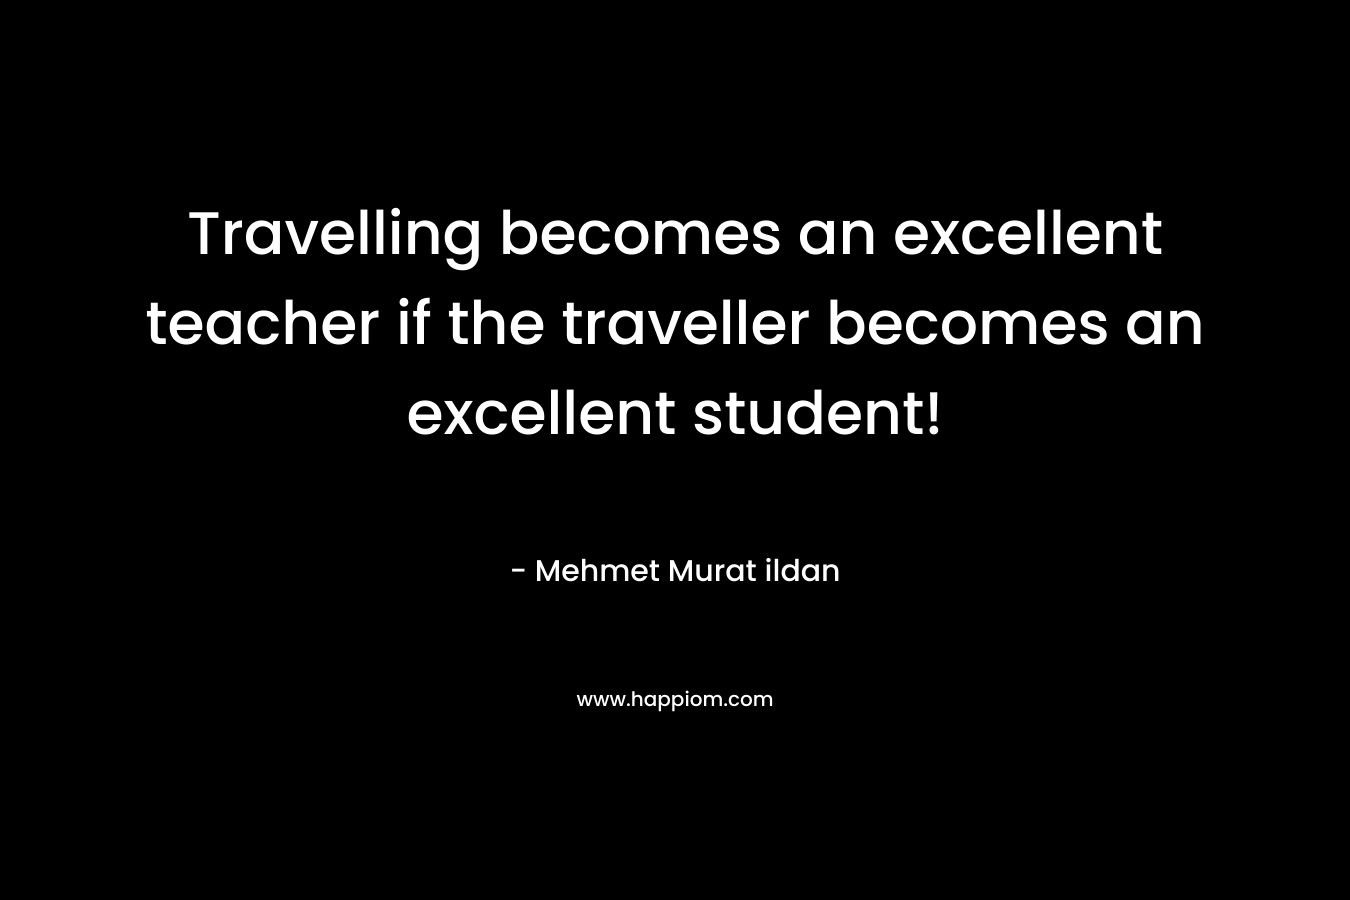 Travelling becomes an excellent teacher if the traveller becomes an excellent student! – Mehmet Murat ildan